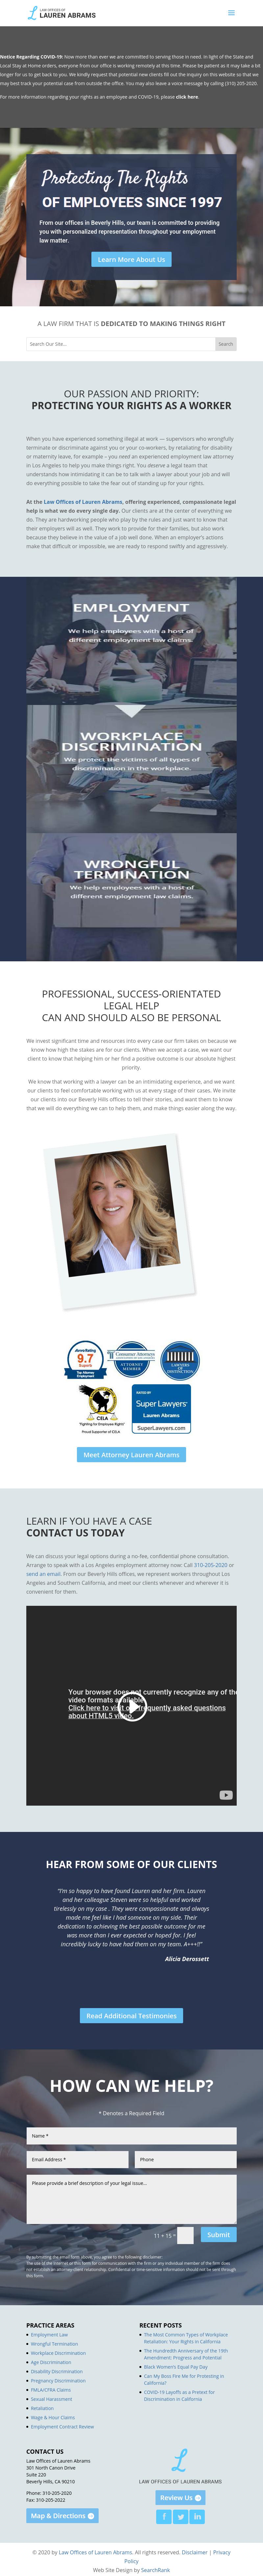 Law Offices of Lauren Abrams - Beverly Hills CA Lawyers